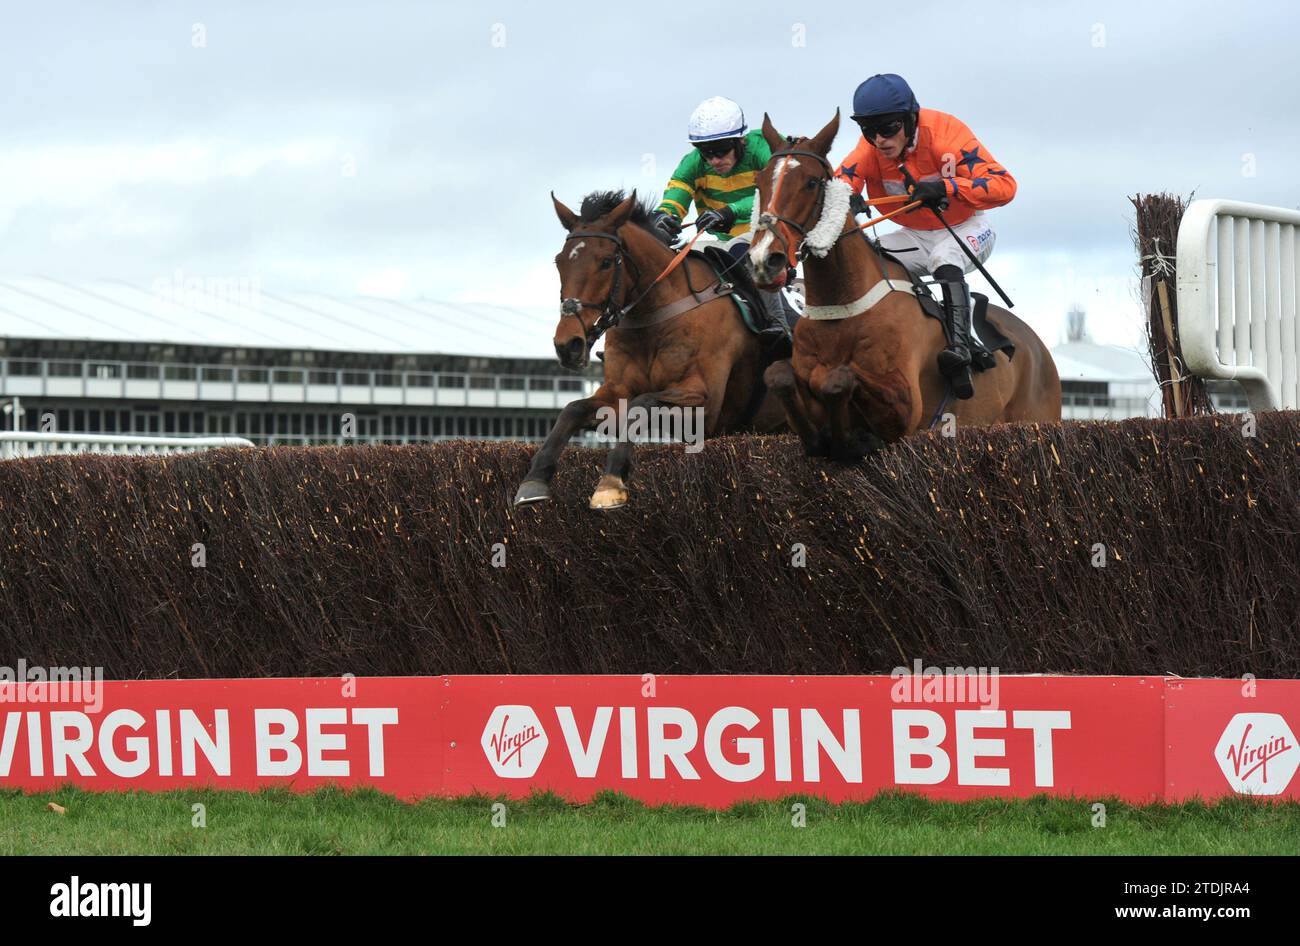 Racing at Cheltenham Day 2 of the Christmas Meet   Race 3 The Quintessentially Handicap Chase    L2r In Excelsis Deo ridden by Jonathan Burke and even Stock Photo